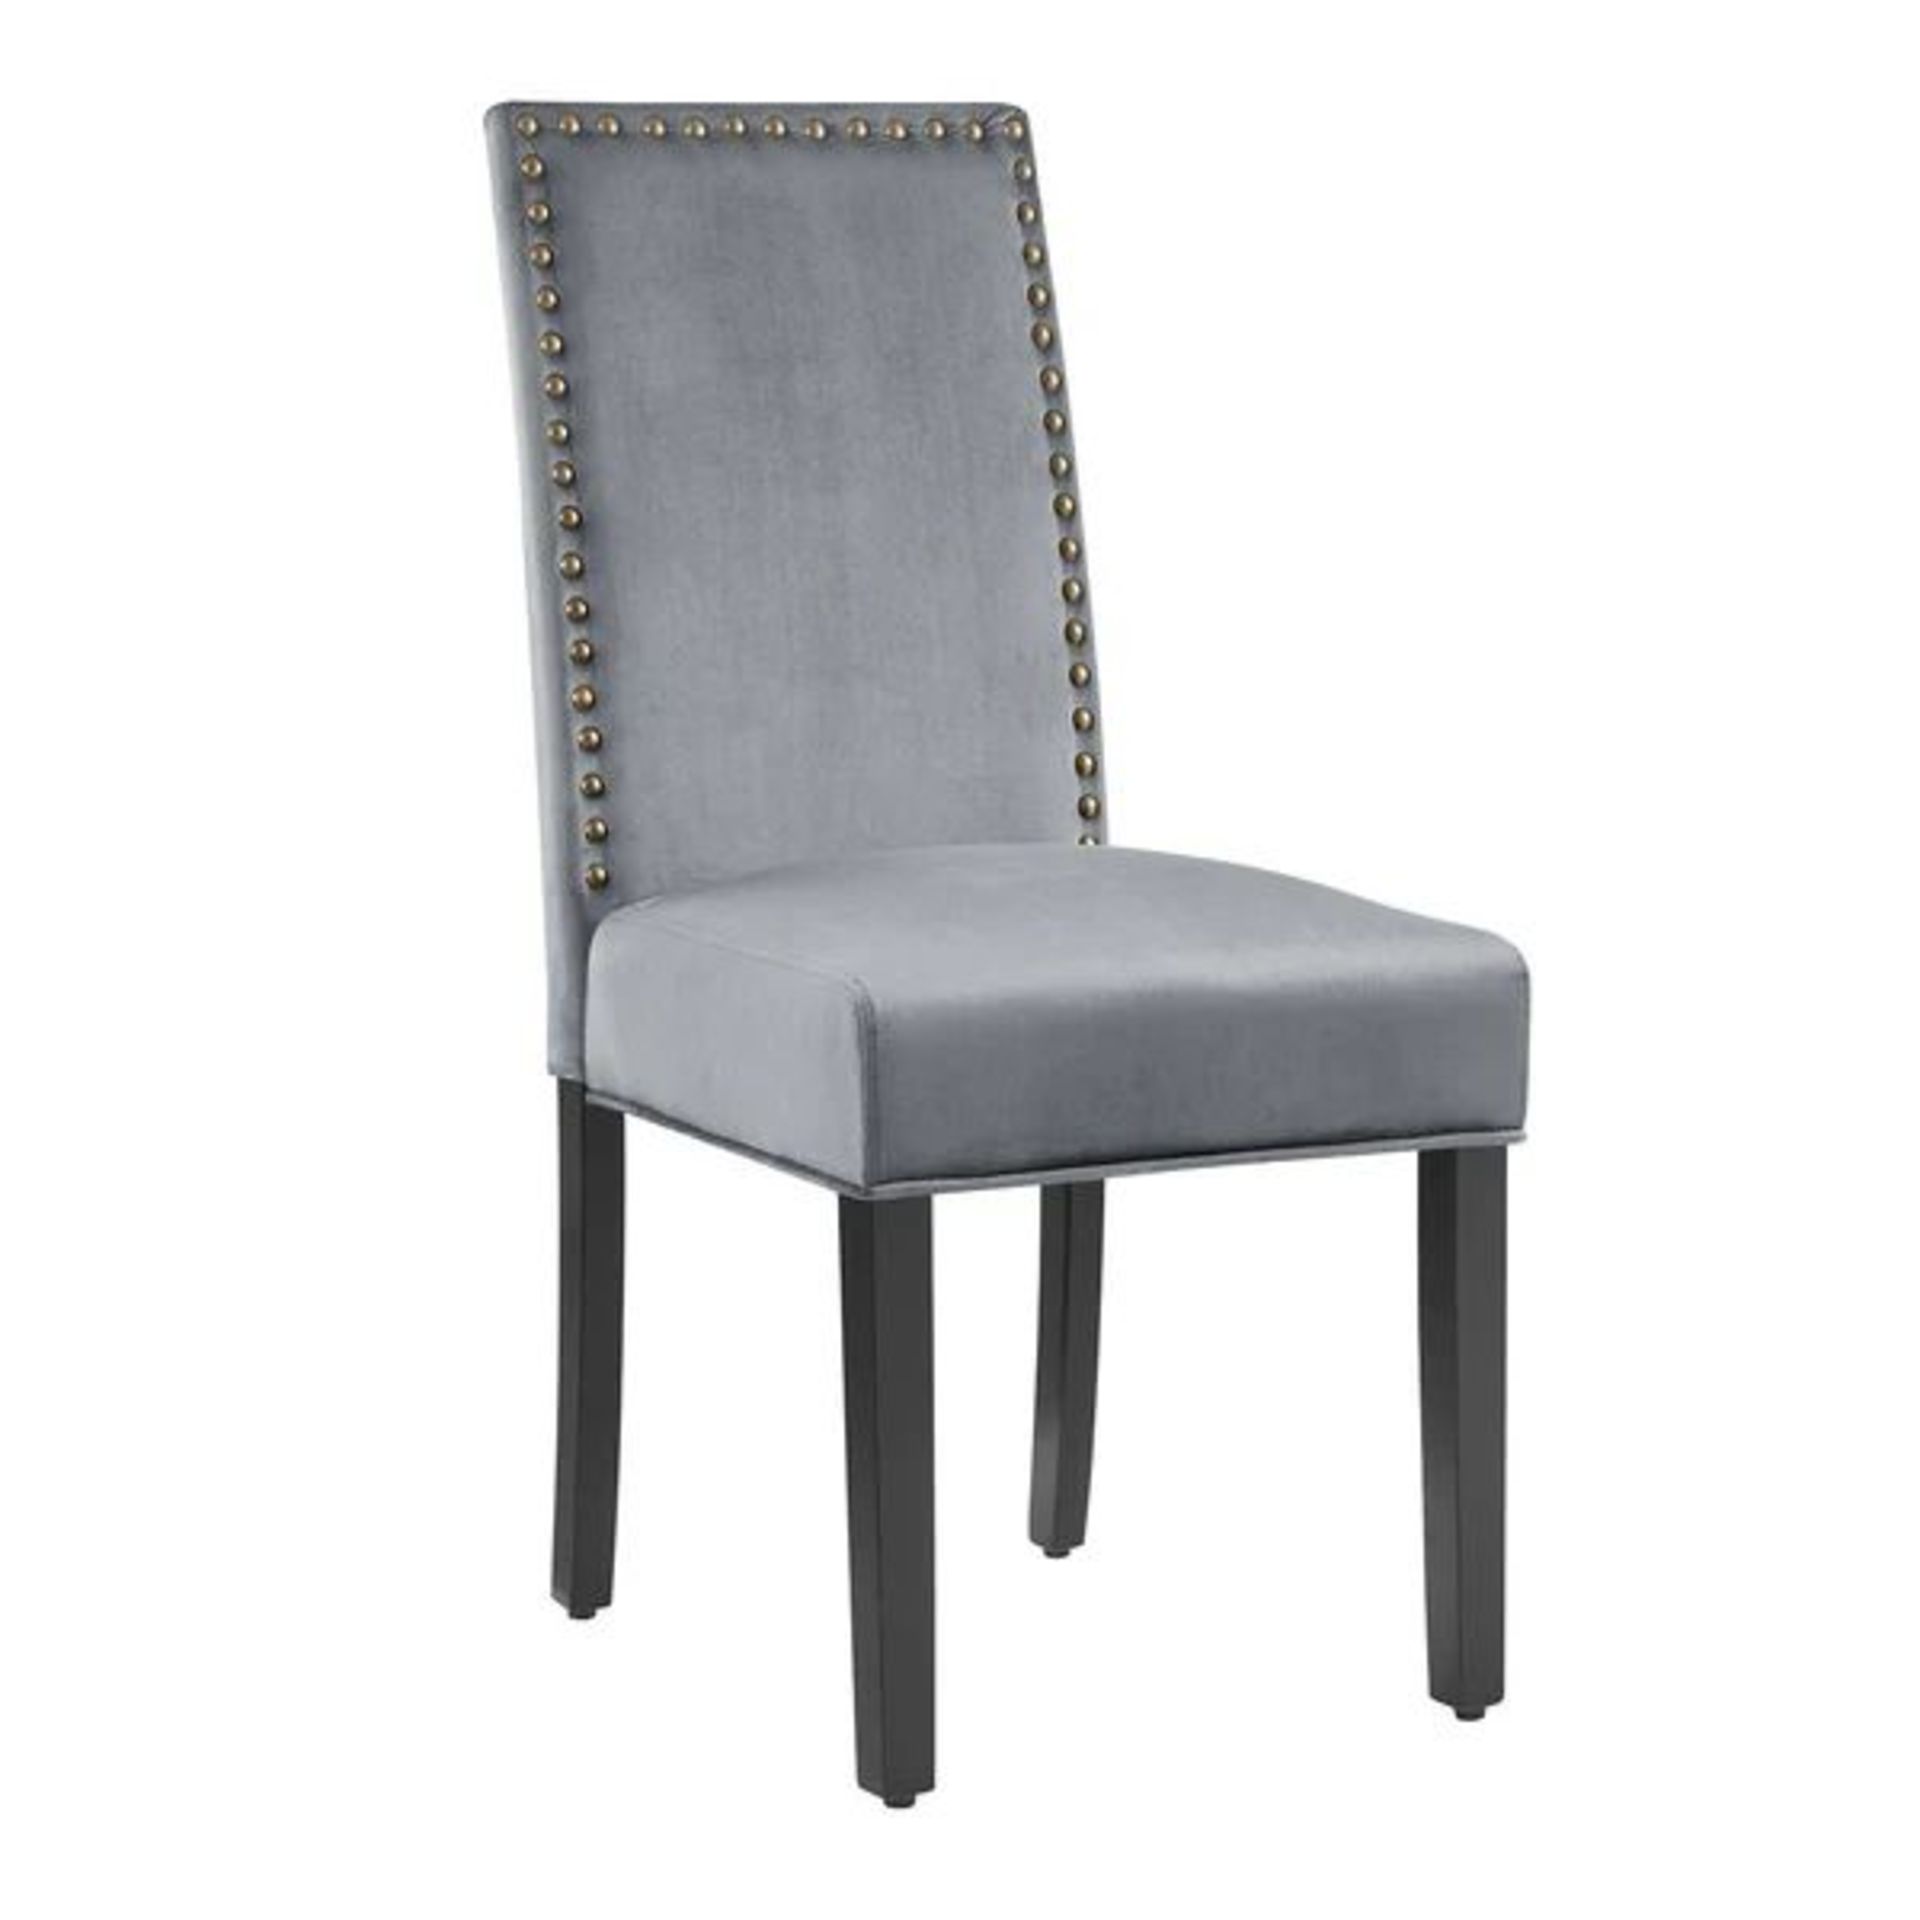 Maidwell Set of 2 Grey Velvet Dining Chairs. - R14. RRP £199.99. With a sleek sihoutte, our Maidwell - Bild 2 aus 2